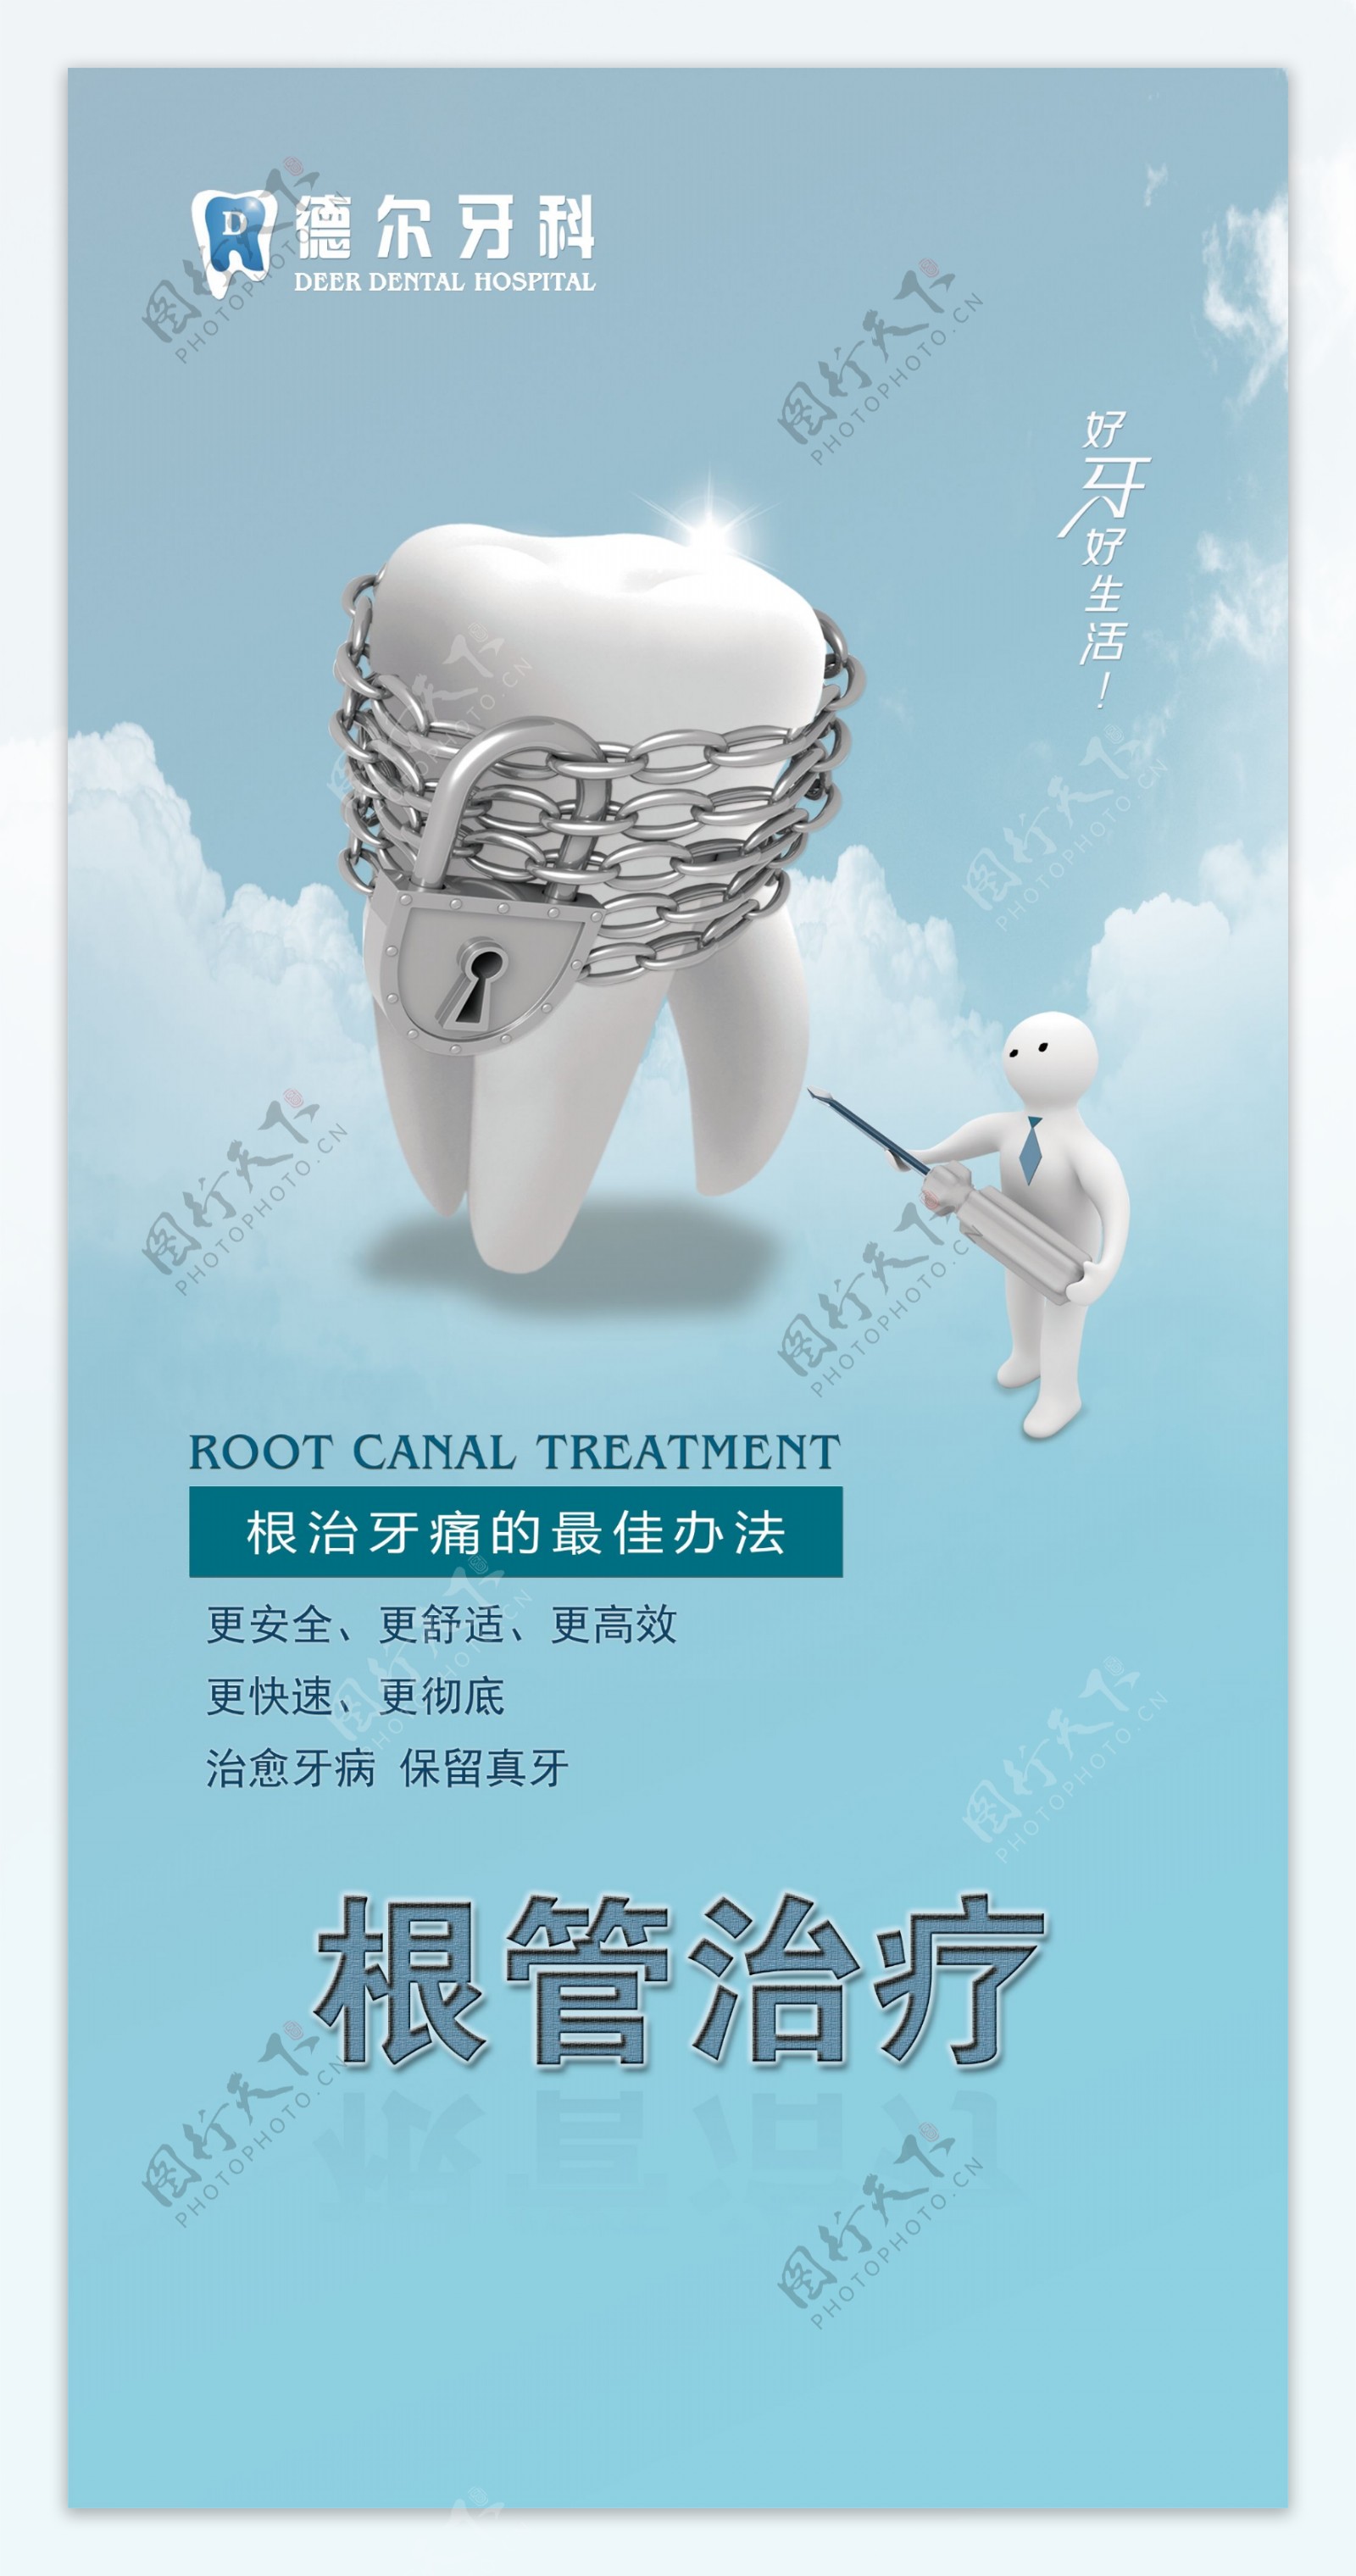 What You Need to Know About Root Canal Treatments | Chomp Dental